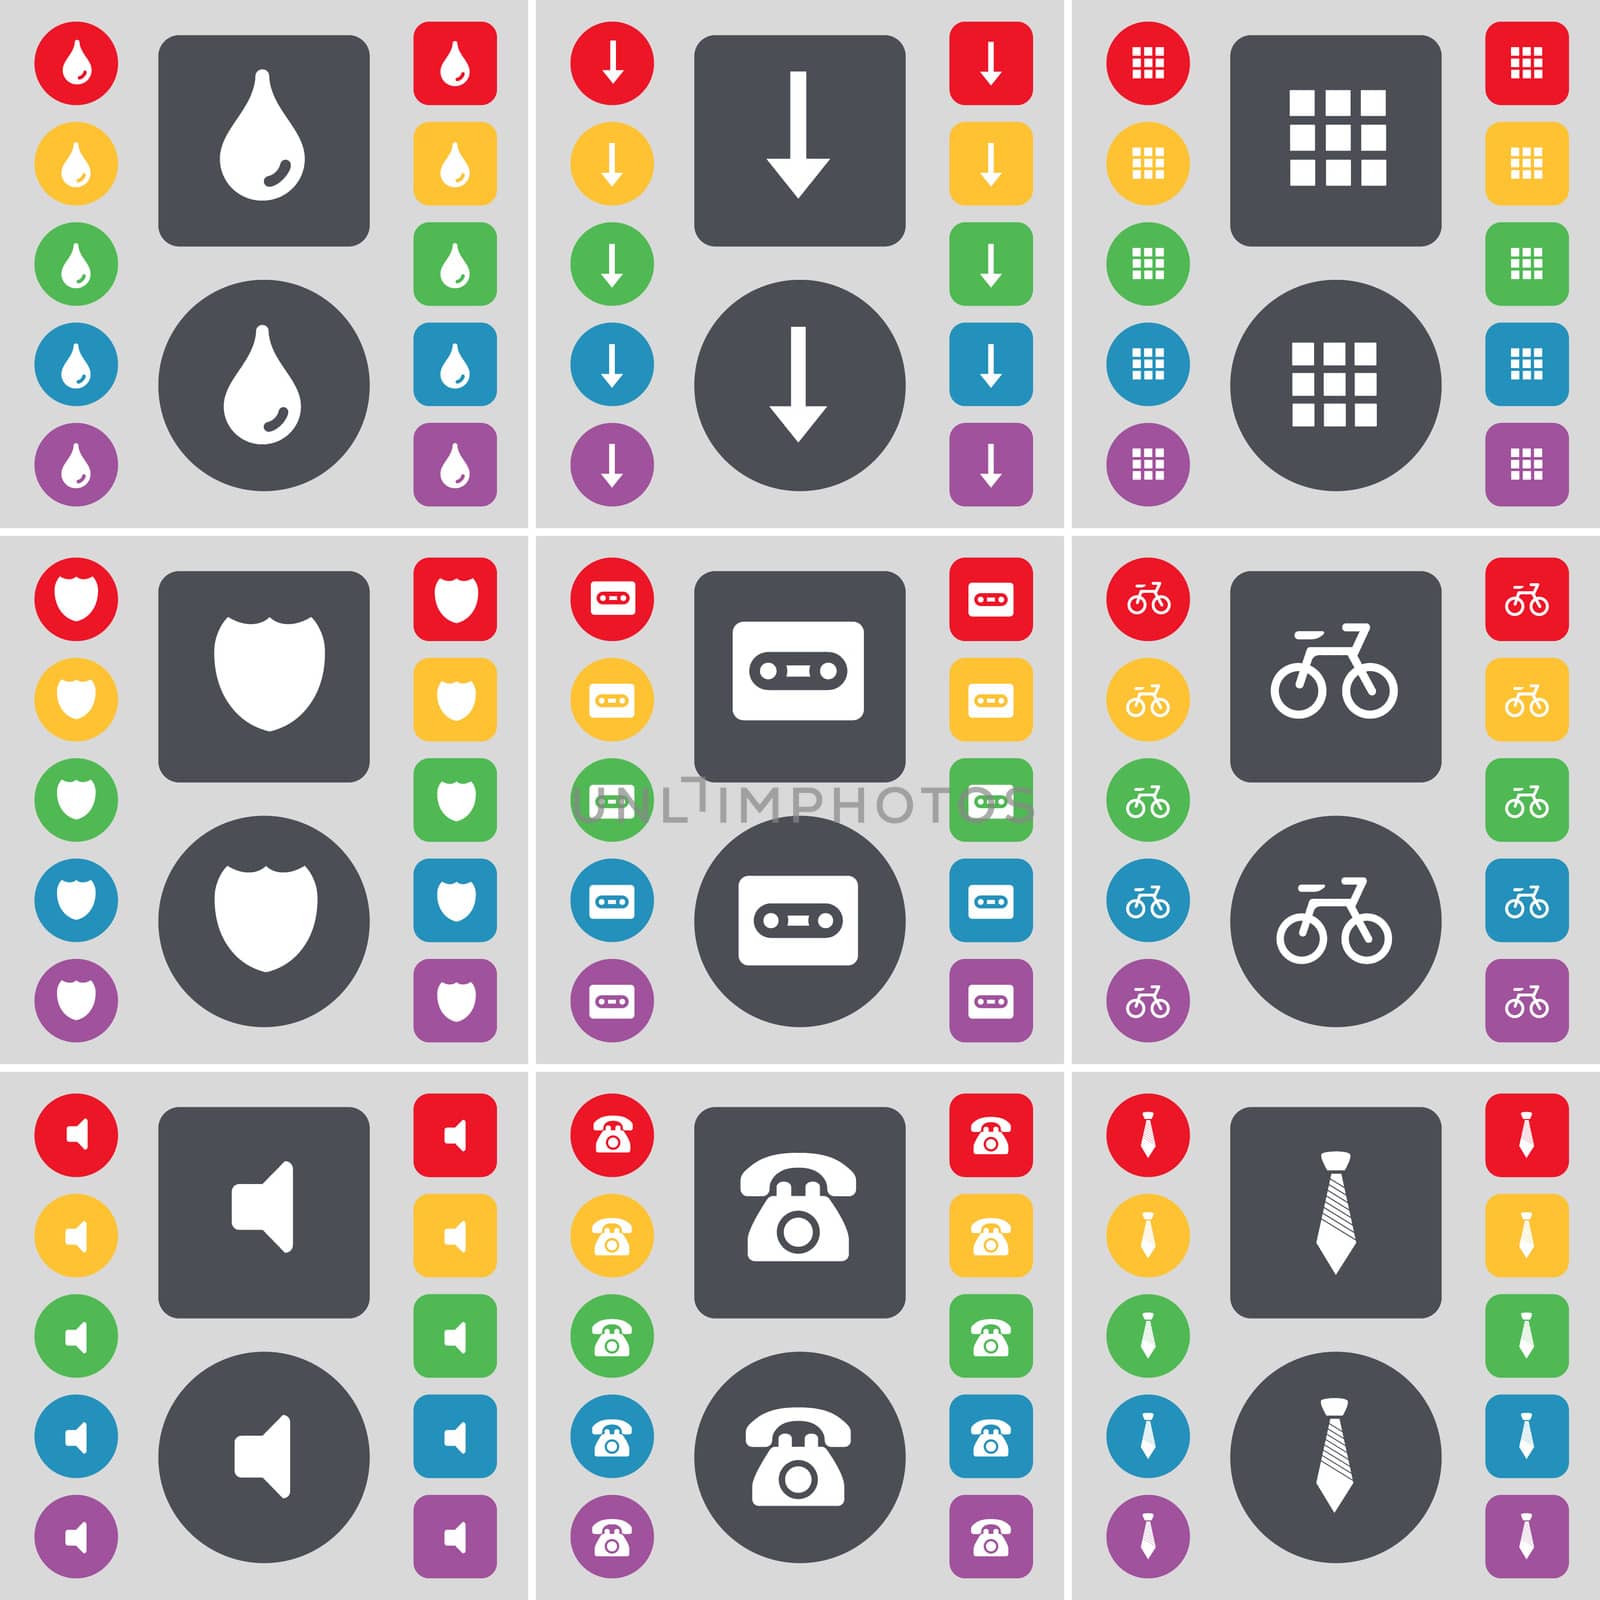 Drop, Arrow down, Apps, Badge, Cassette, Bicycle, Sound, Retro phone, Tie icon symbol. A large set of flat, colored buttons for your design. illustration